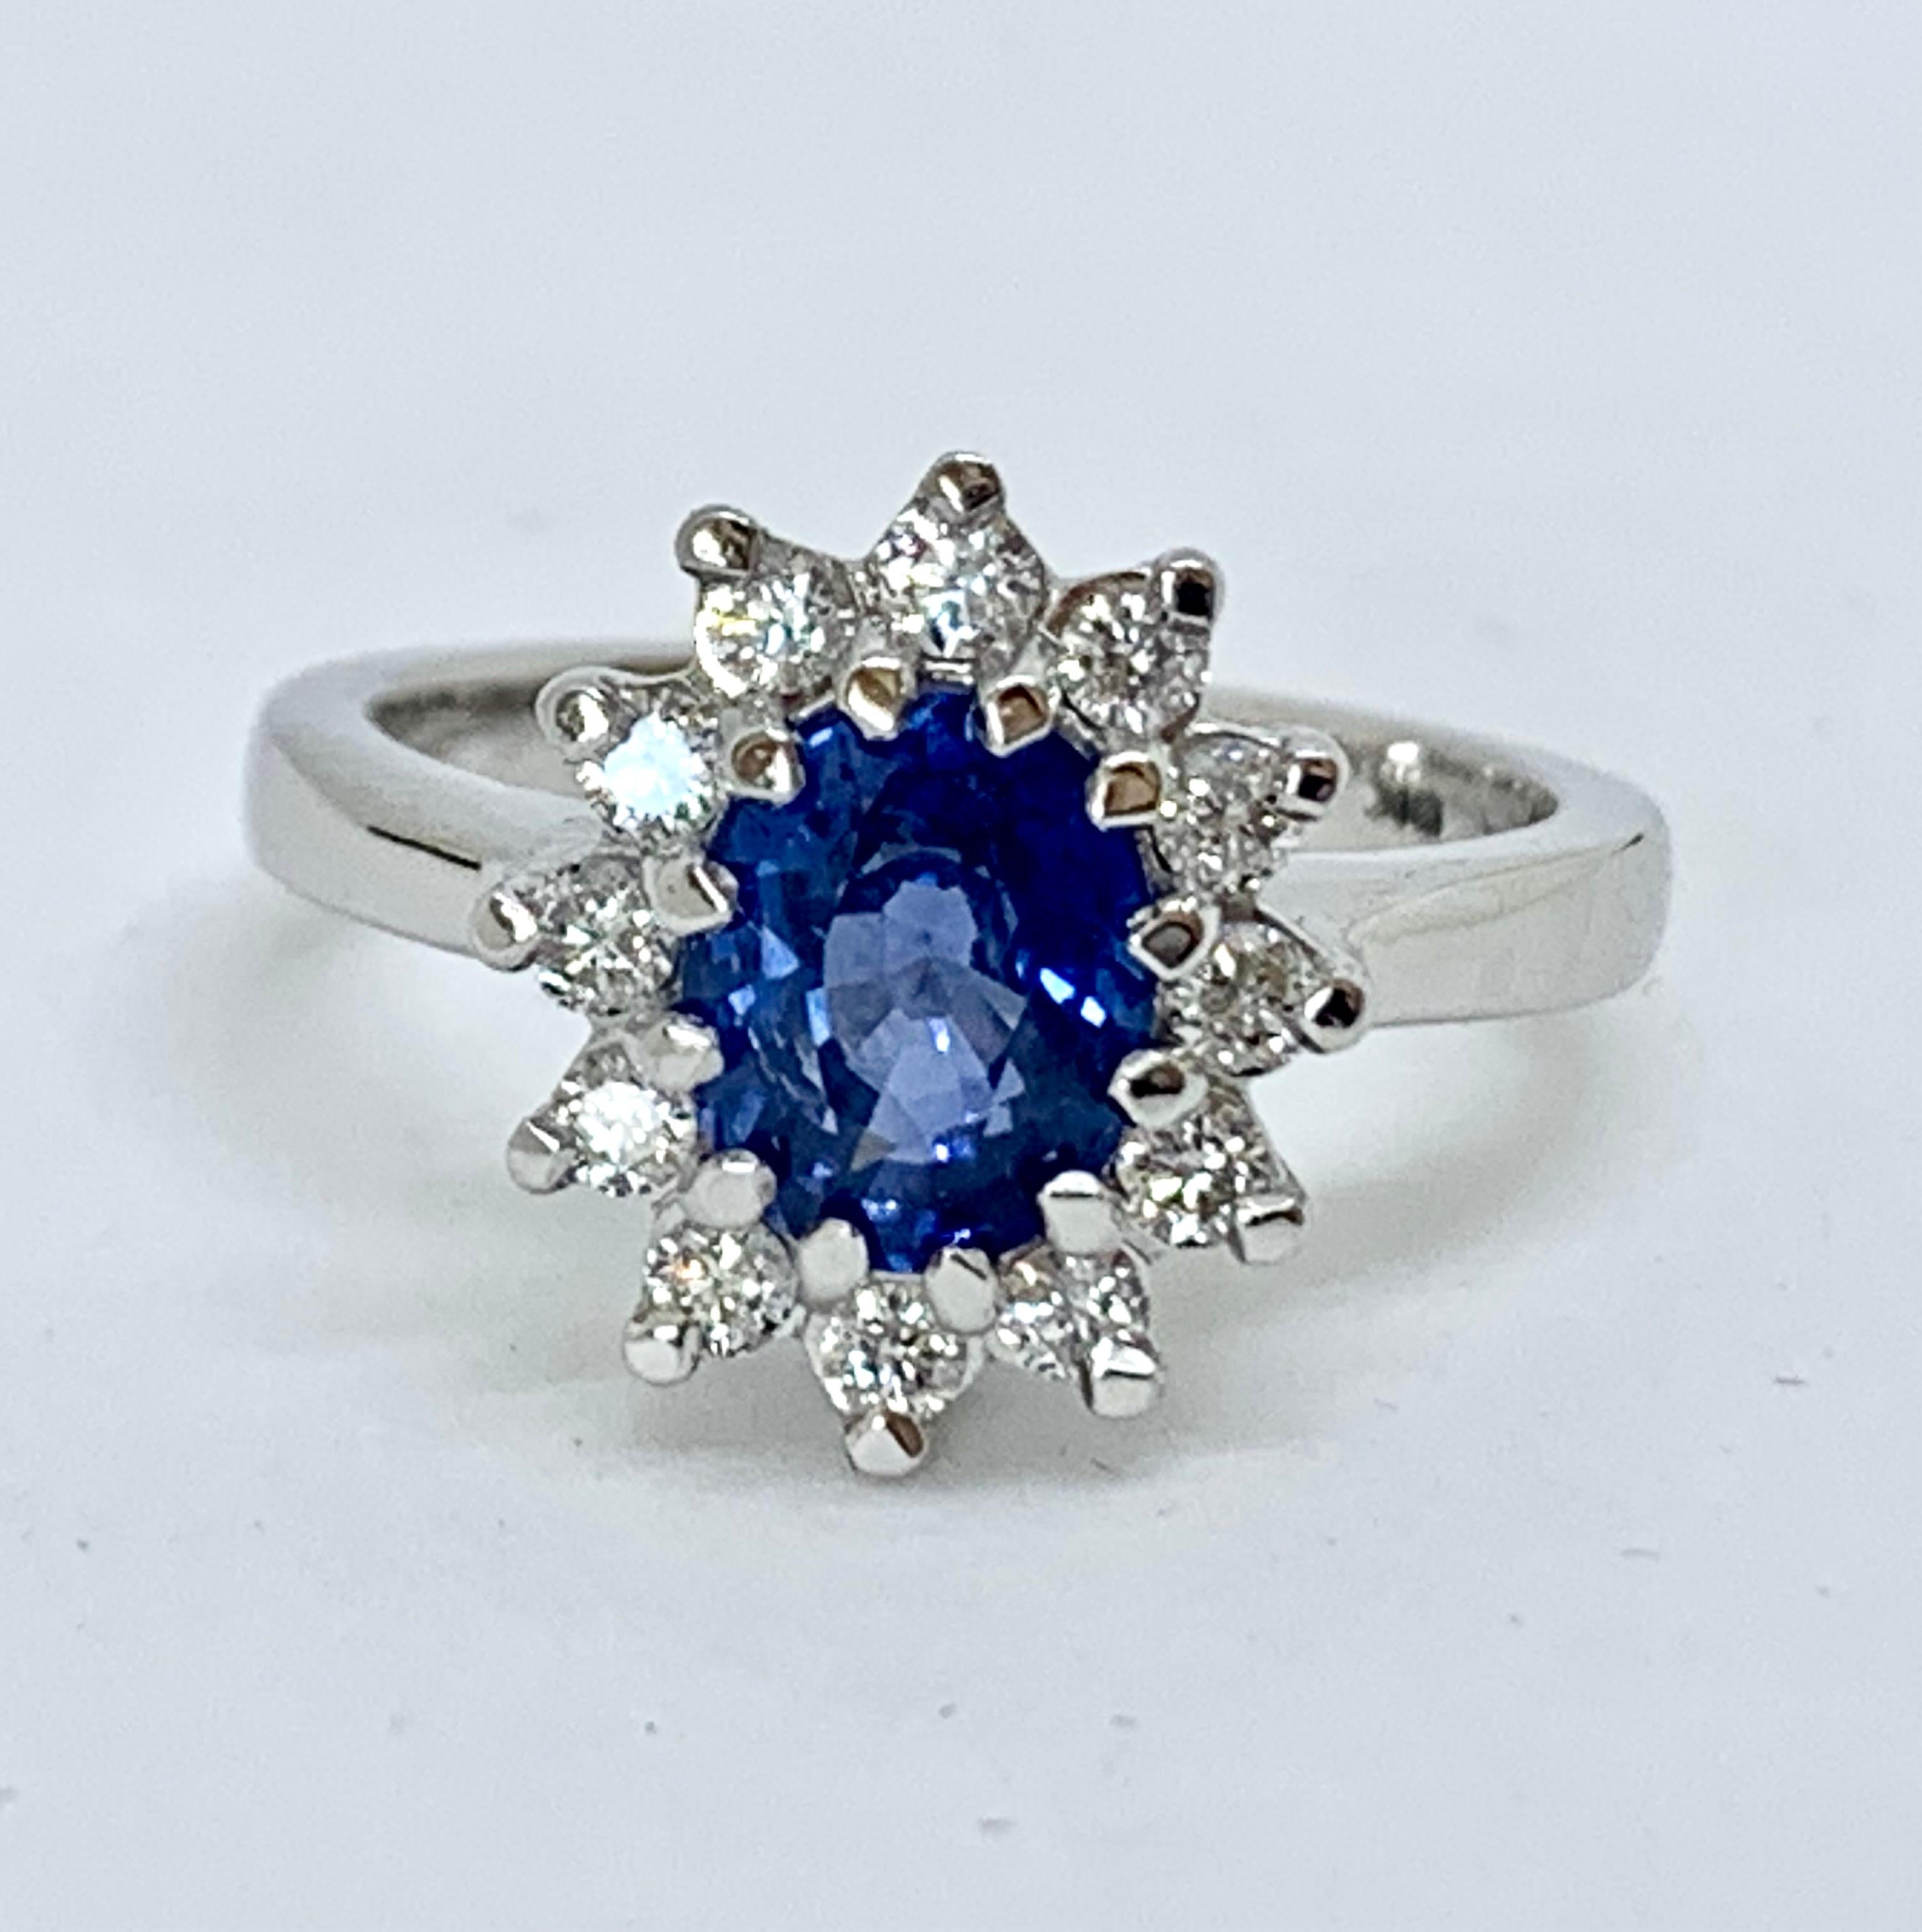 This Beautiful Ring Features a Natural Ceylon Sapphire.
Stunning in its simplicity, the ring features a 1.70ct Natural Sapphire with origin from Ceylon (now Sri Lanka).
It is surrounded by a halo of sparkling Diamonds  and the design gives a